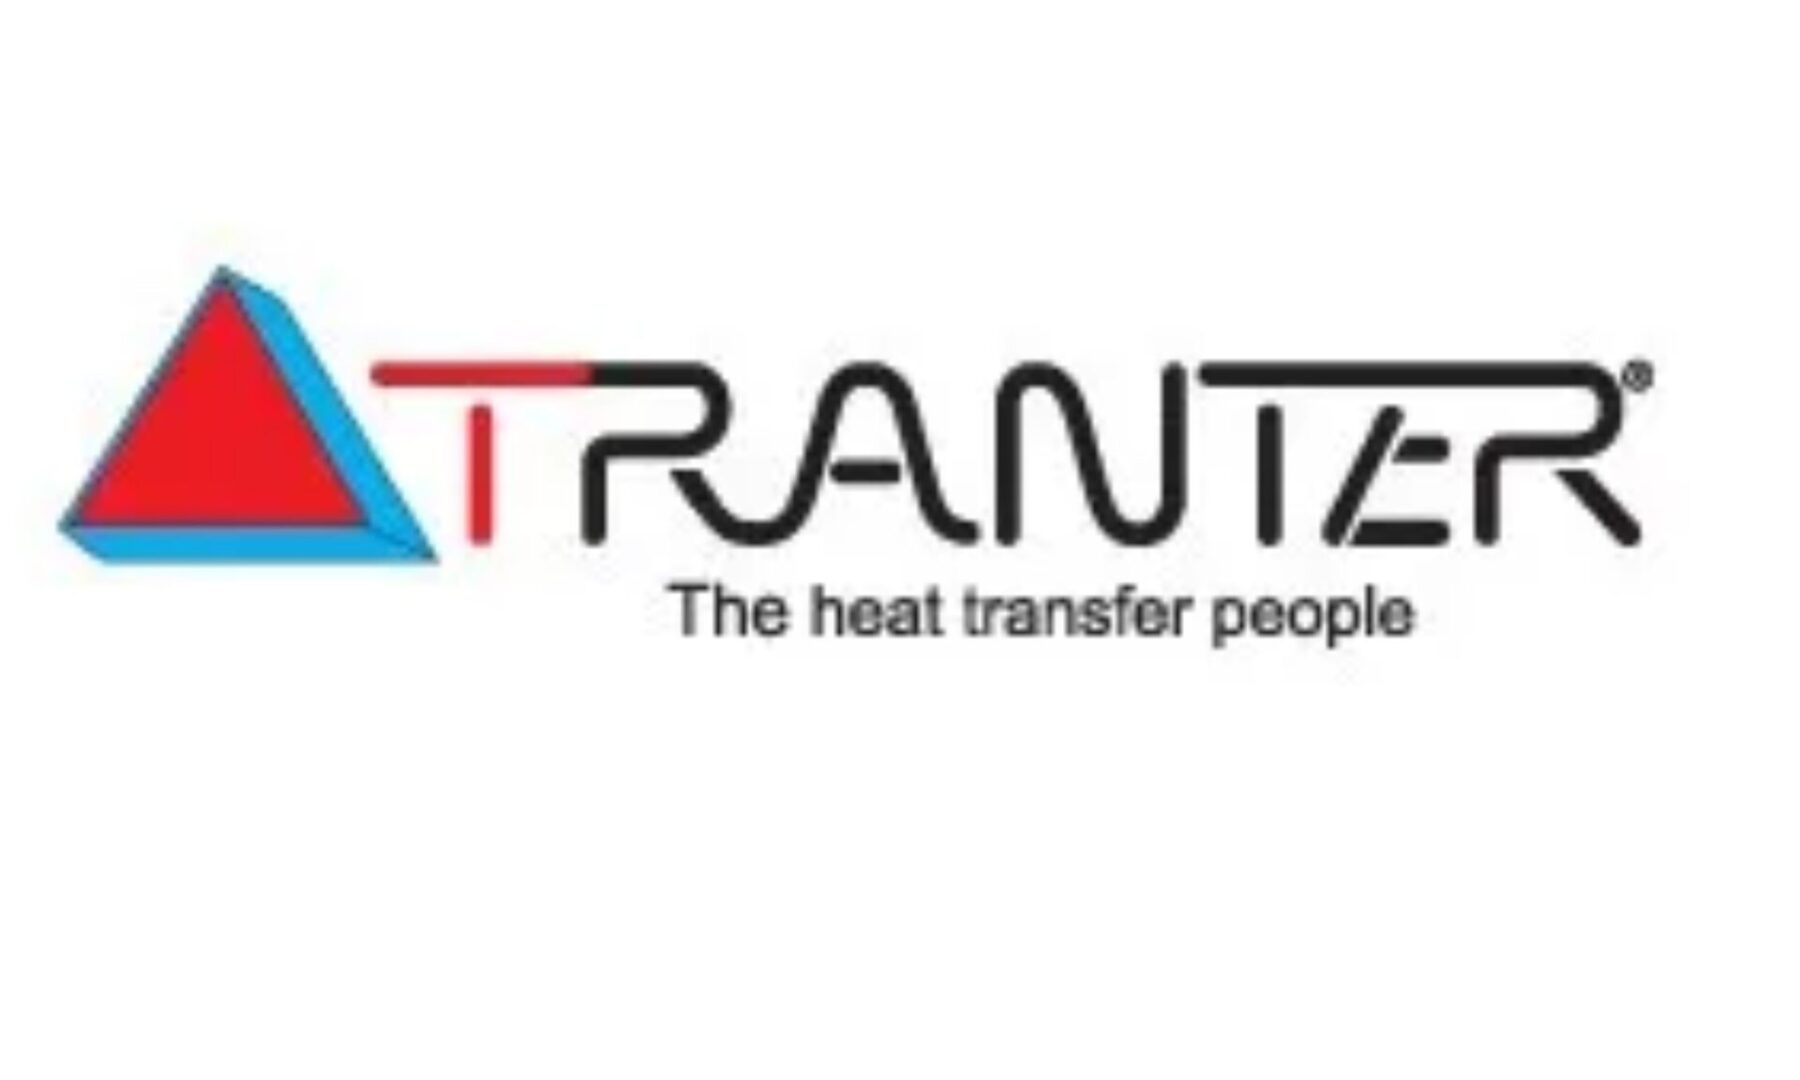 A logo of a company that is called tranta.